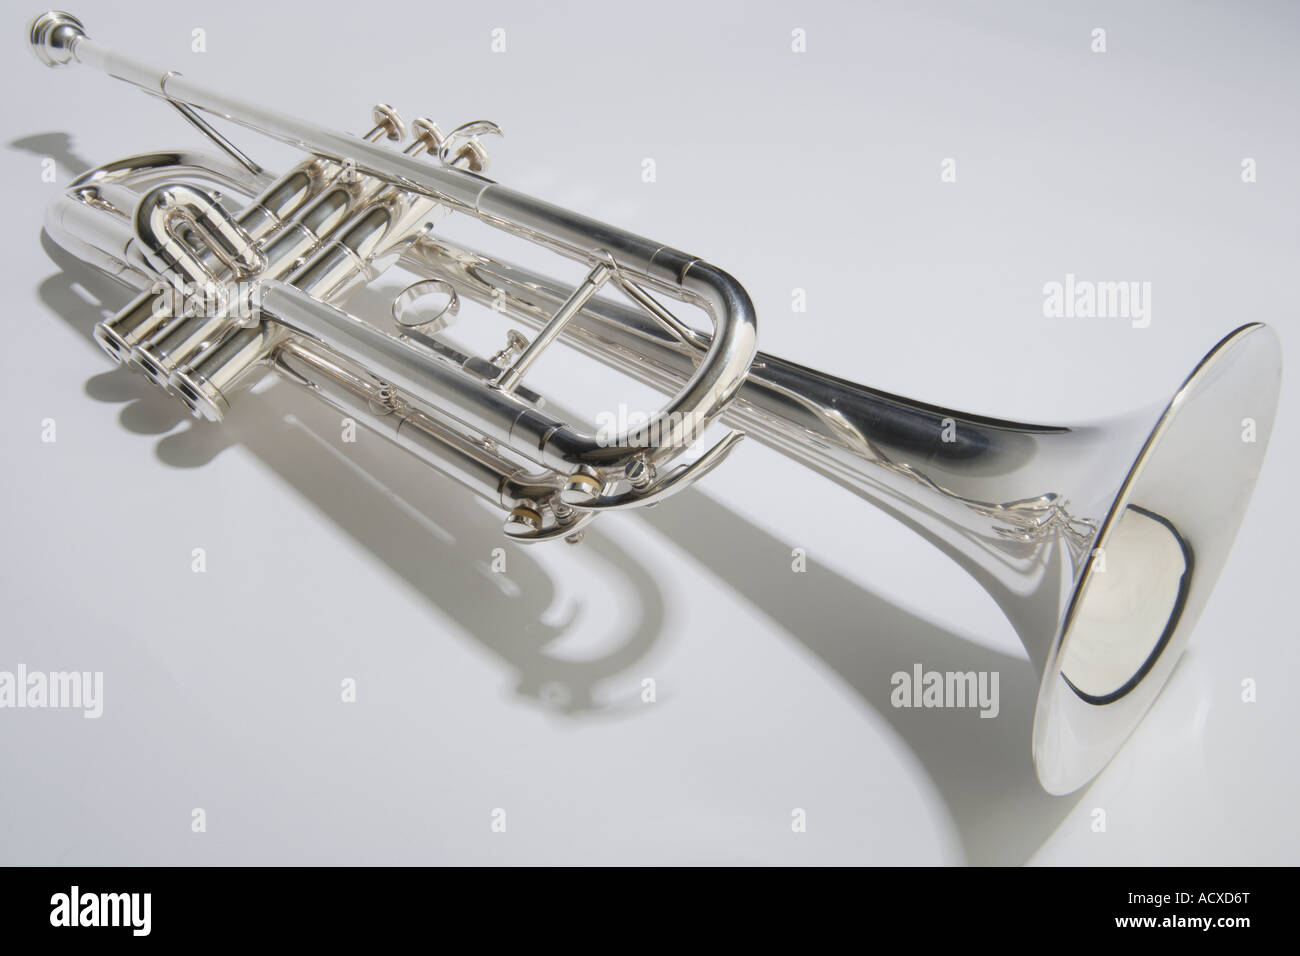 Page 2 - Herald Trumpet High Resolution Stock Photography and Images ...